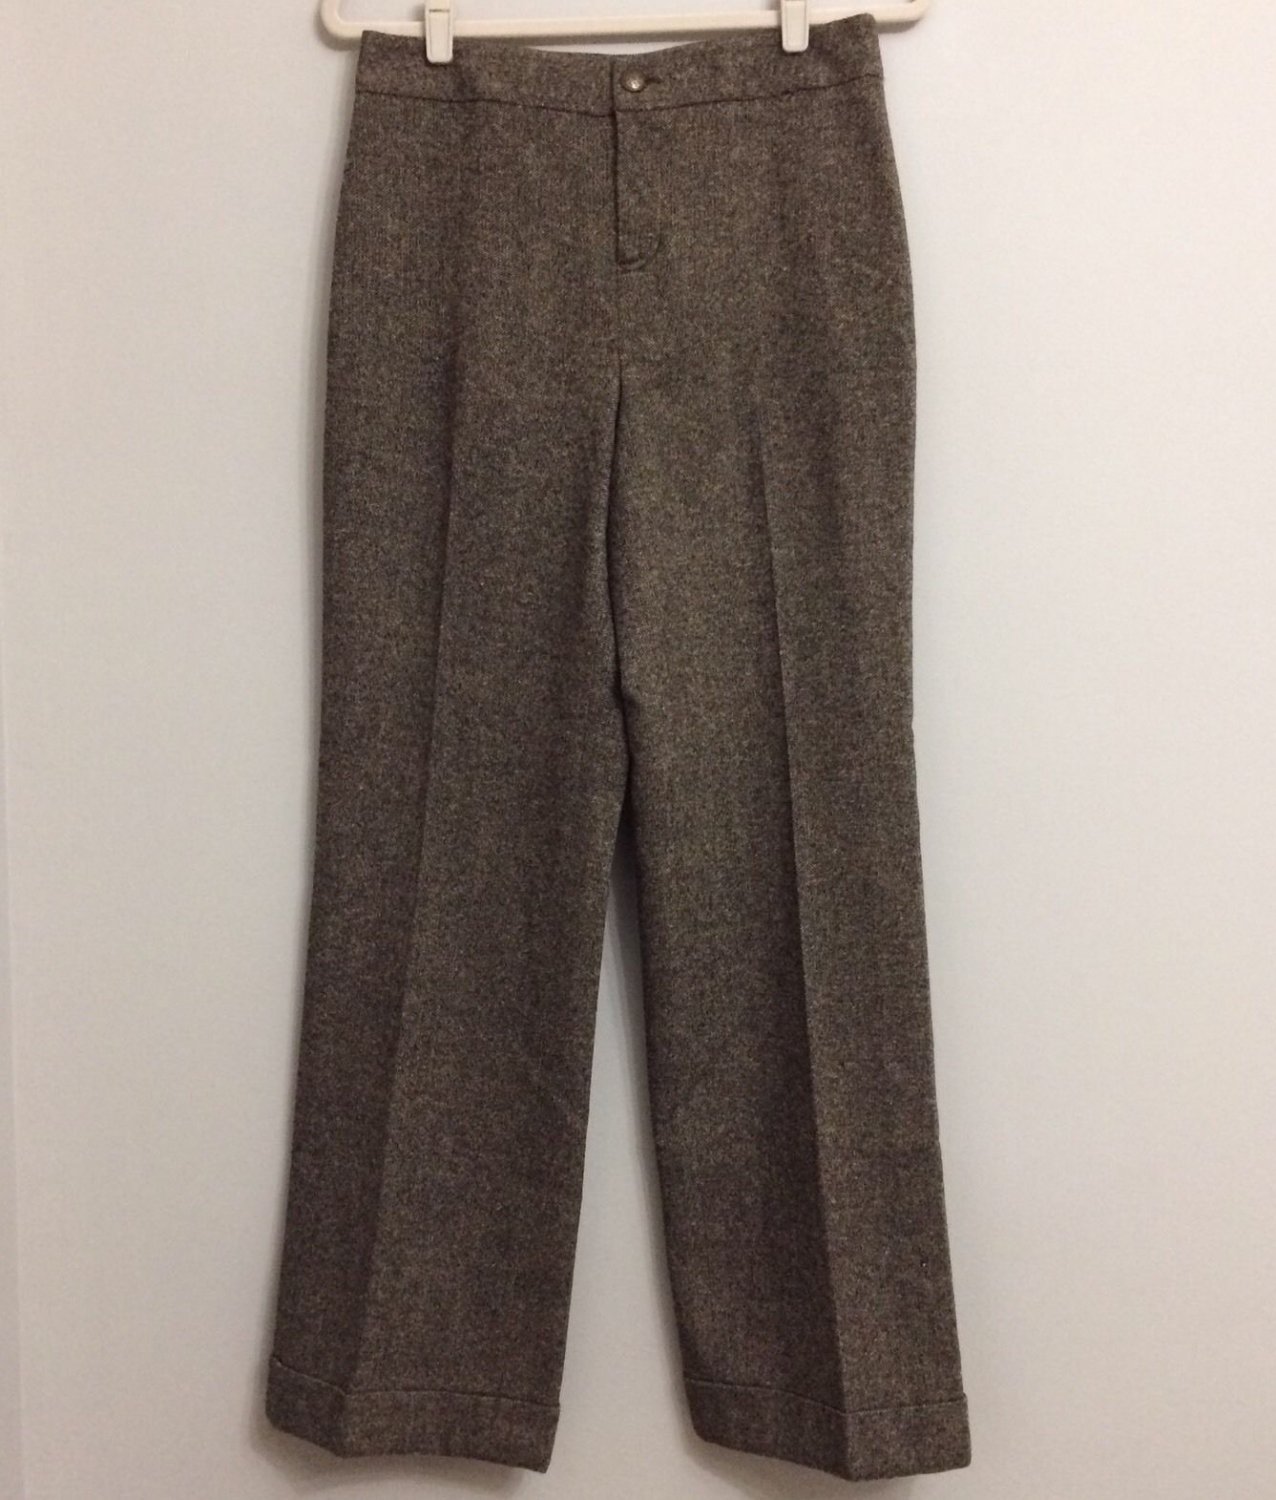 USED Kate Hill Casual 6 Brown Speckled Wool Dress Pants Straight Leg Cuffed